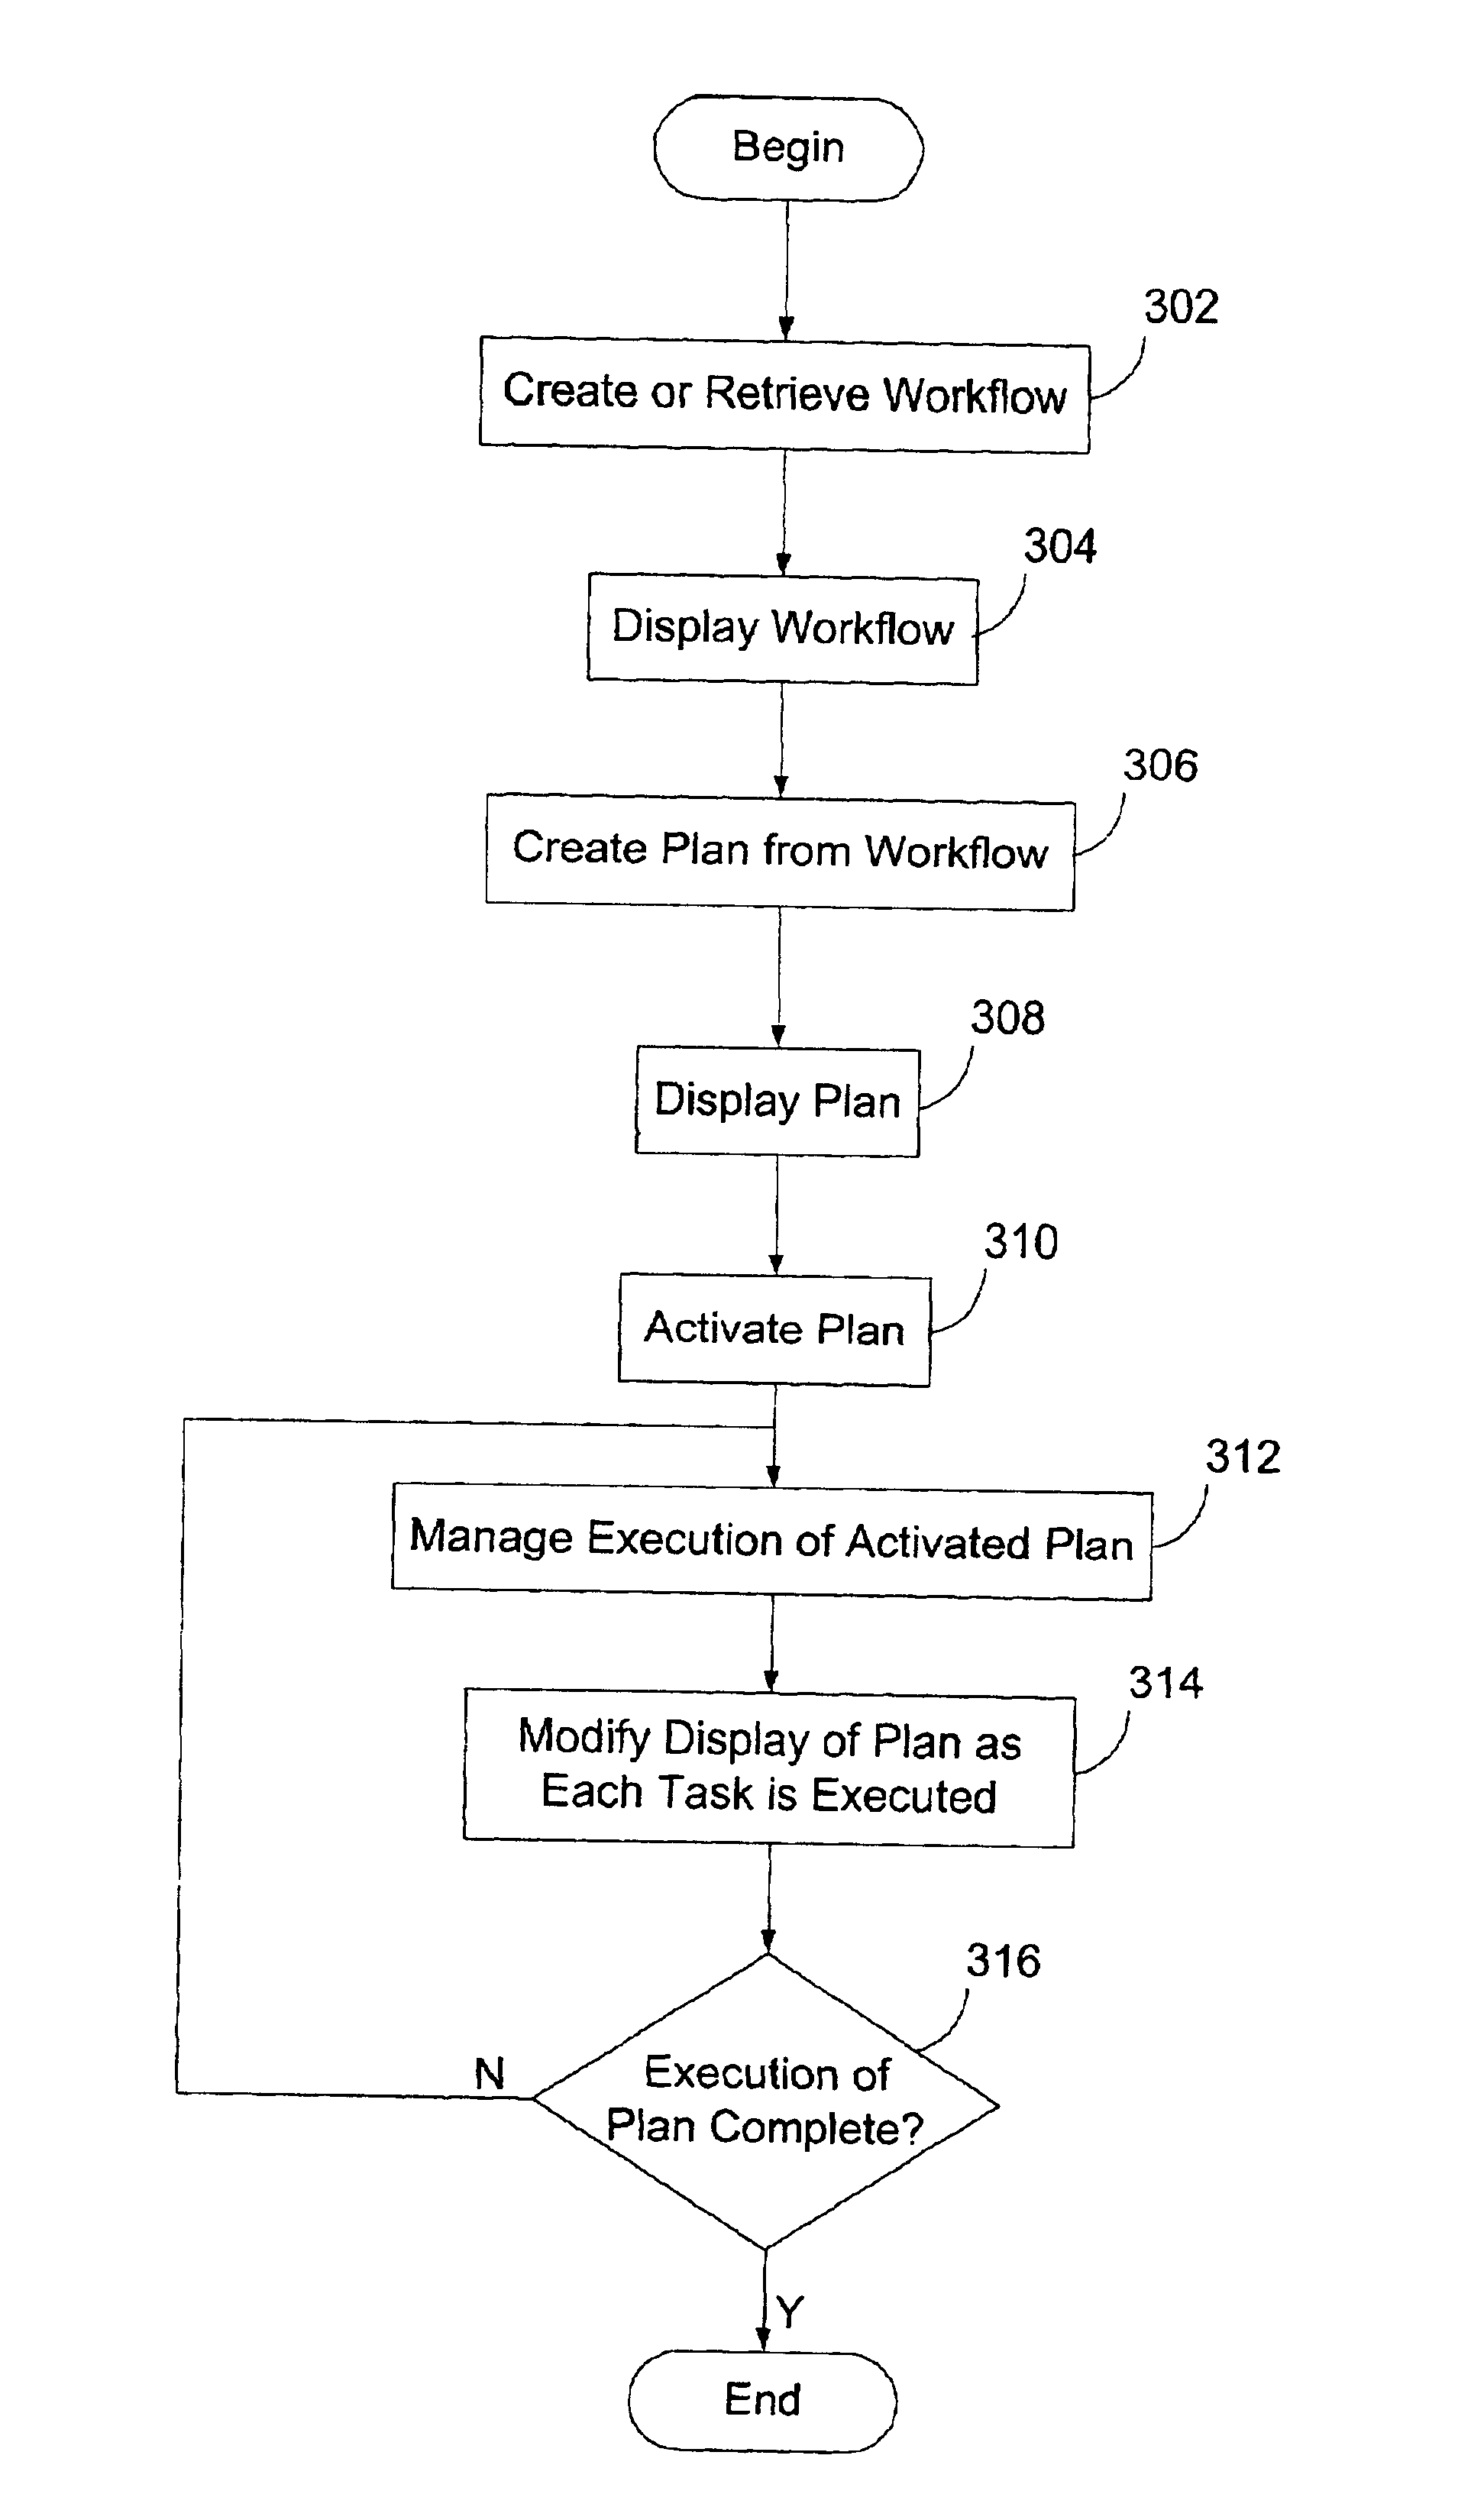 Methods and systems for improving a workflow based on data mined from plans created from the workflow